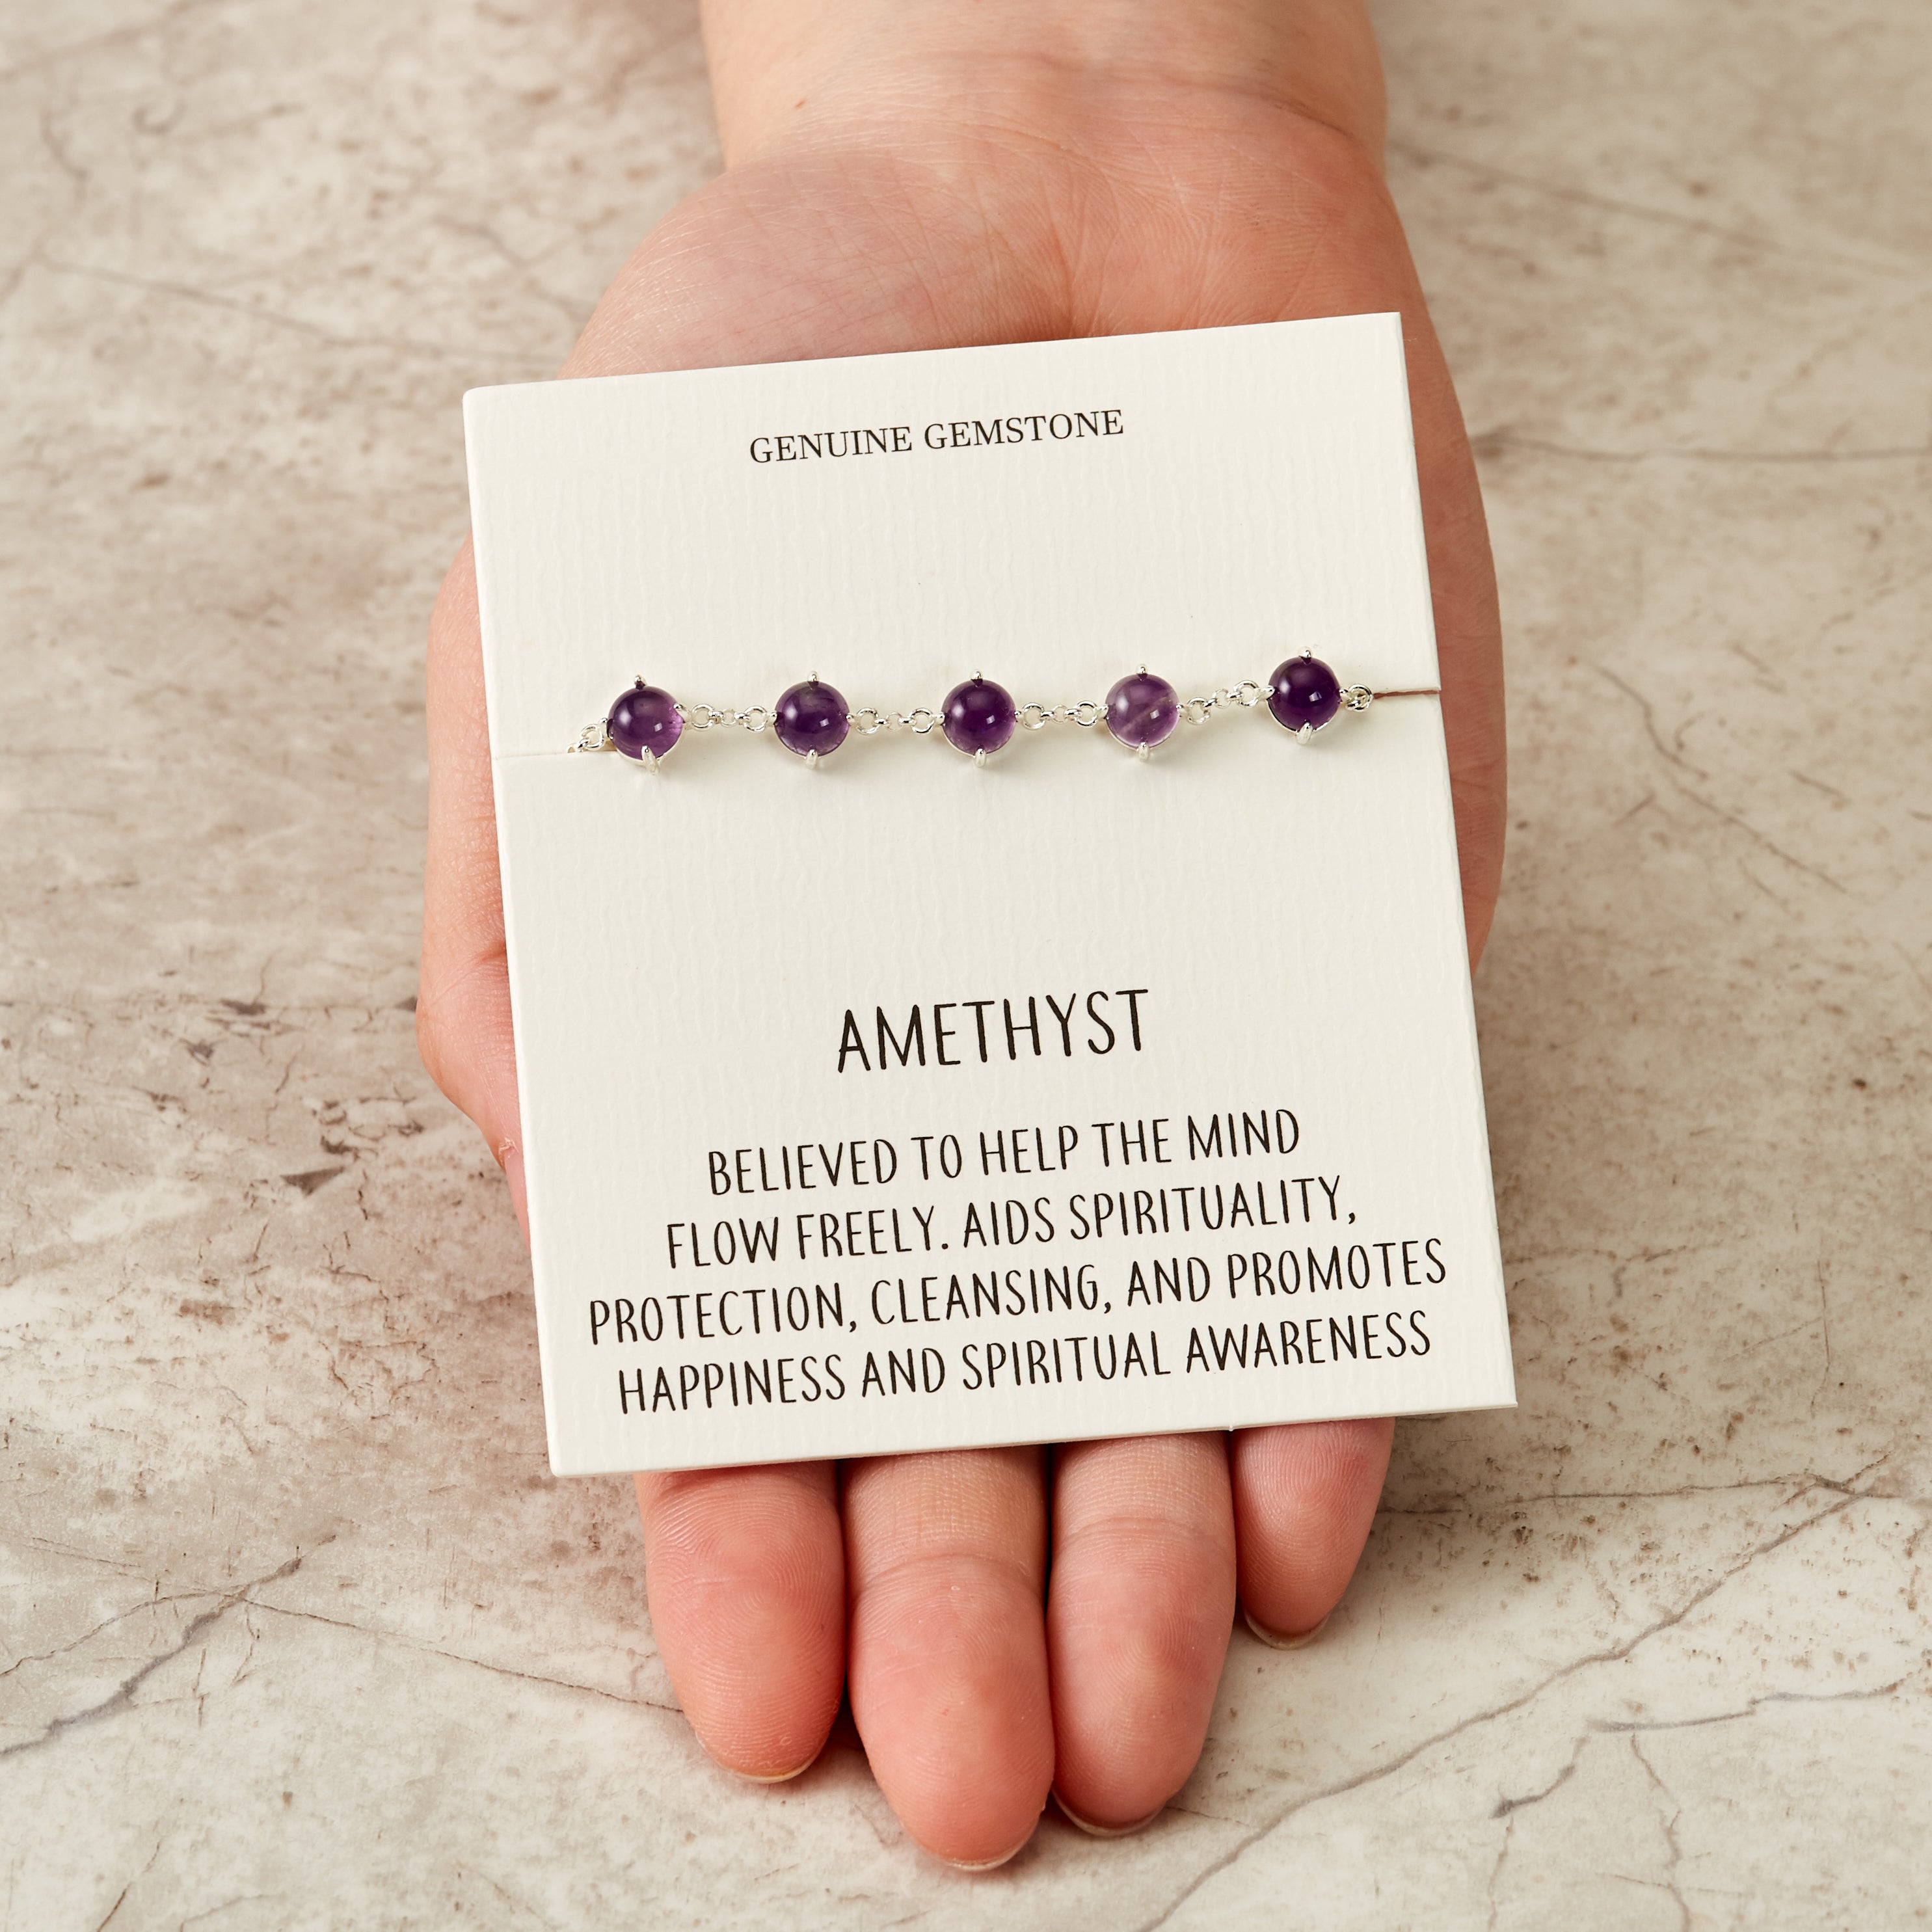 Amethyst Gemstone Bracelet with Quote Card